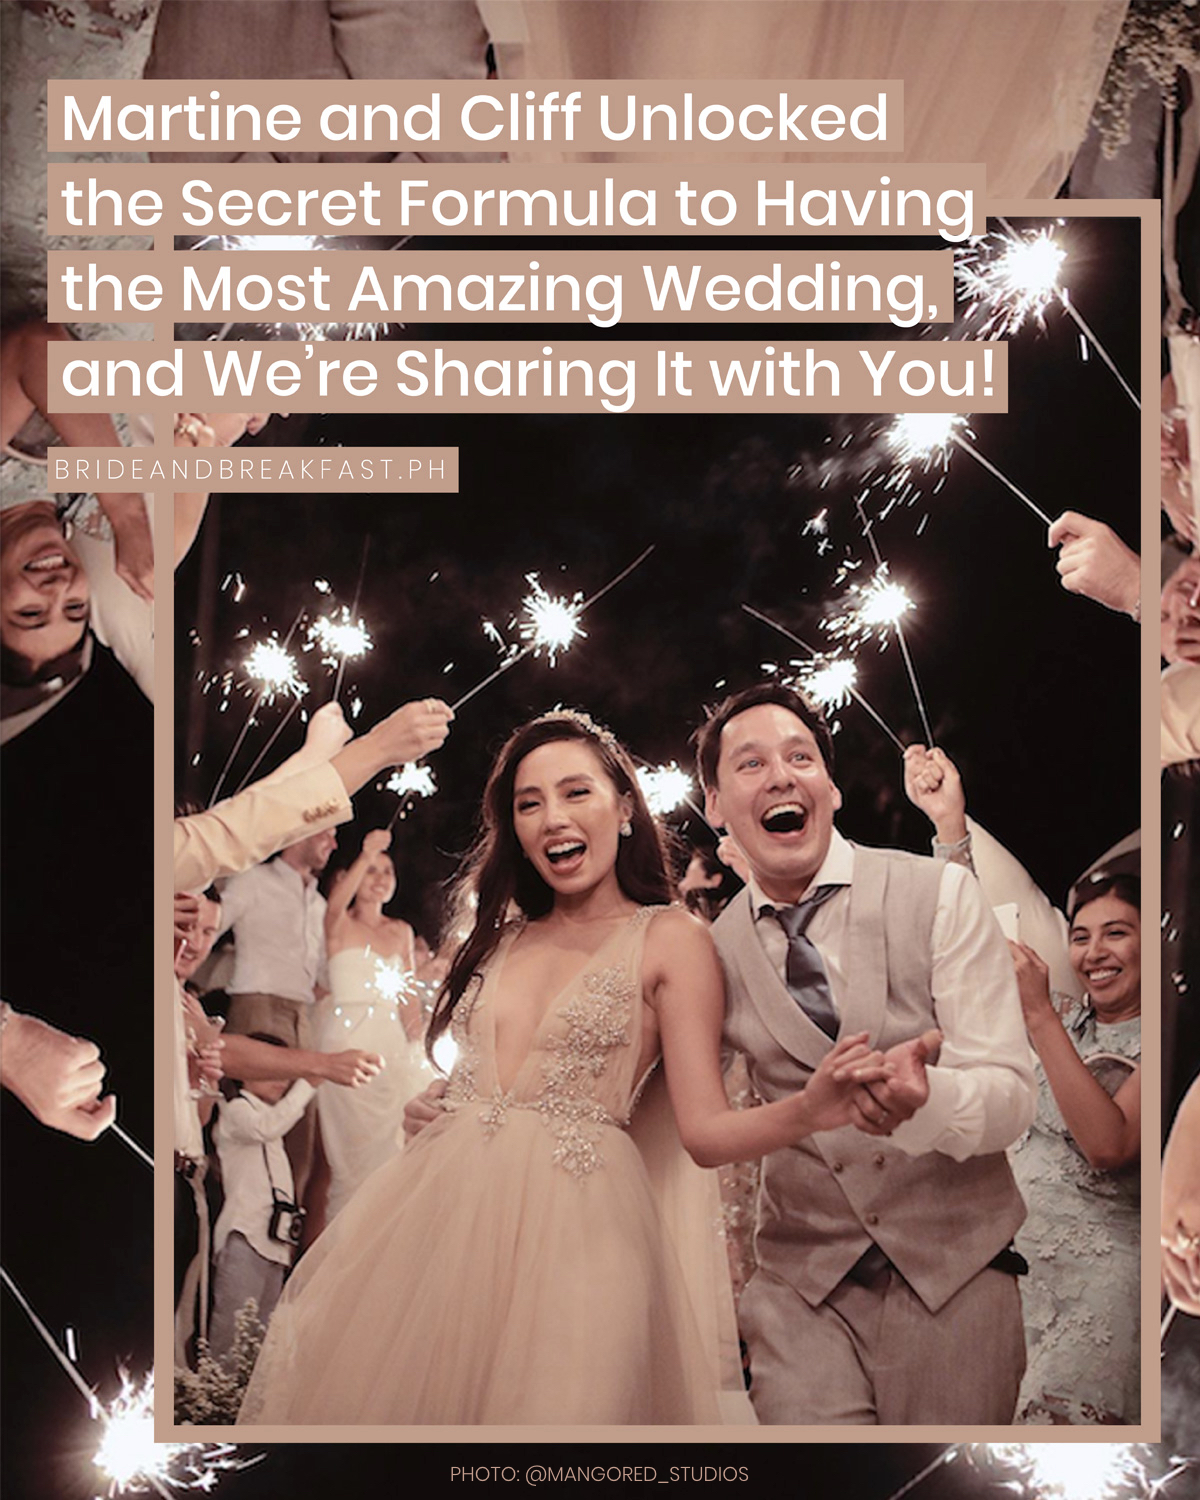 Martine and Cliff Unlocked the Secret Formula to Having the Most Amazing Wedding, and We're Sharing It with You!